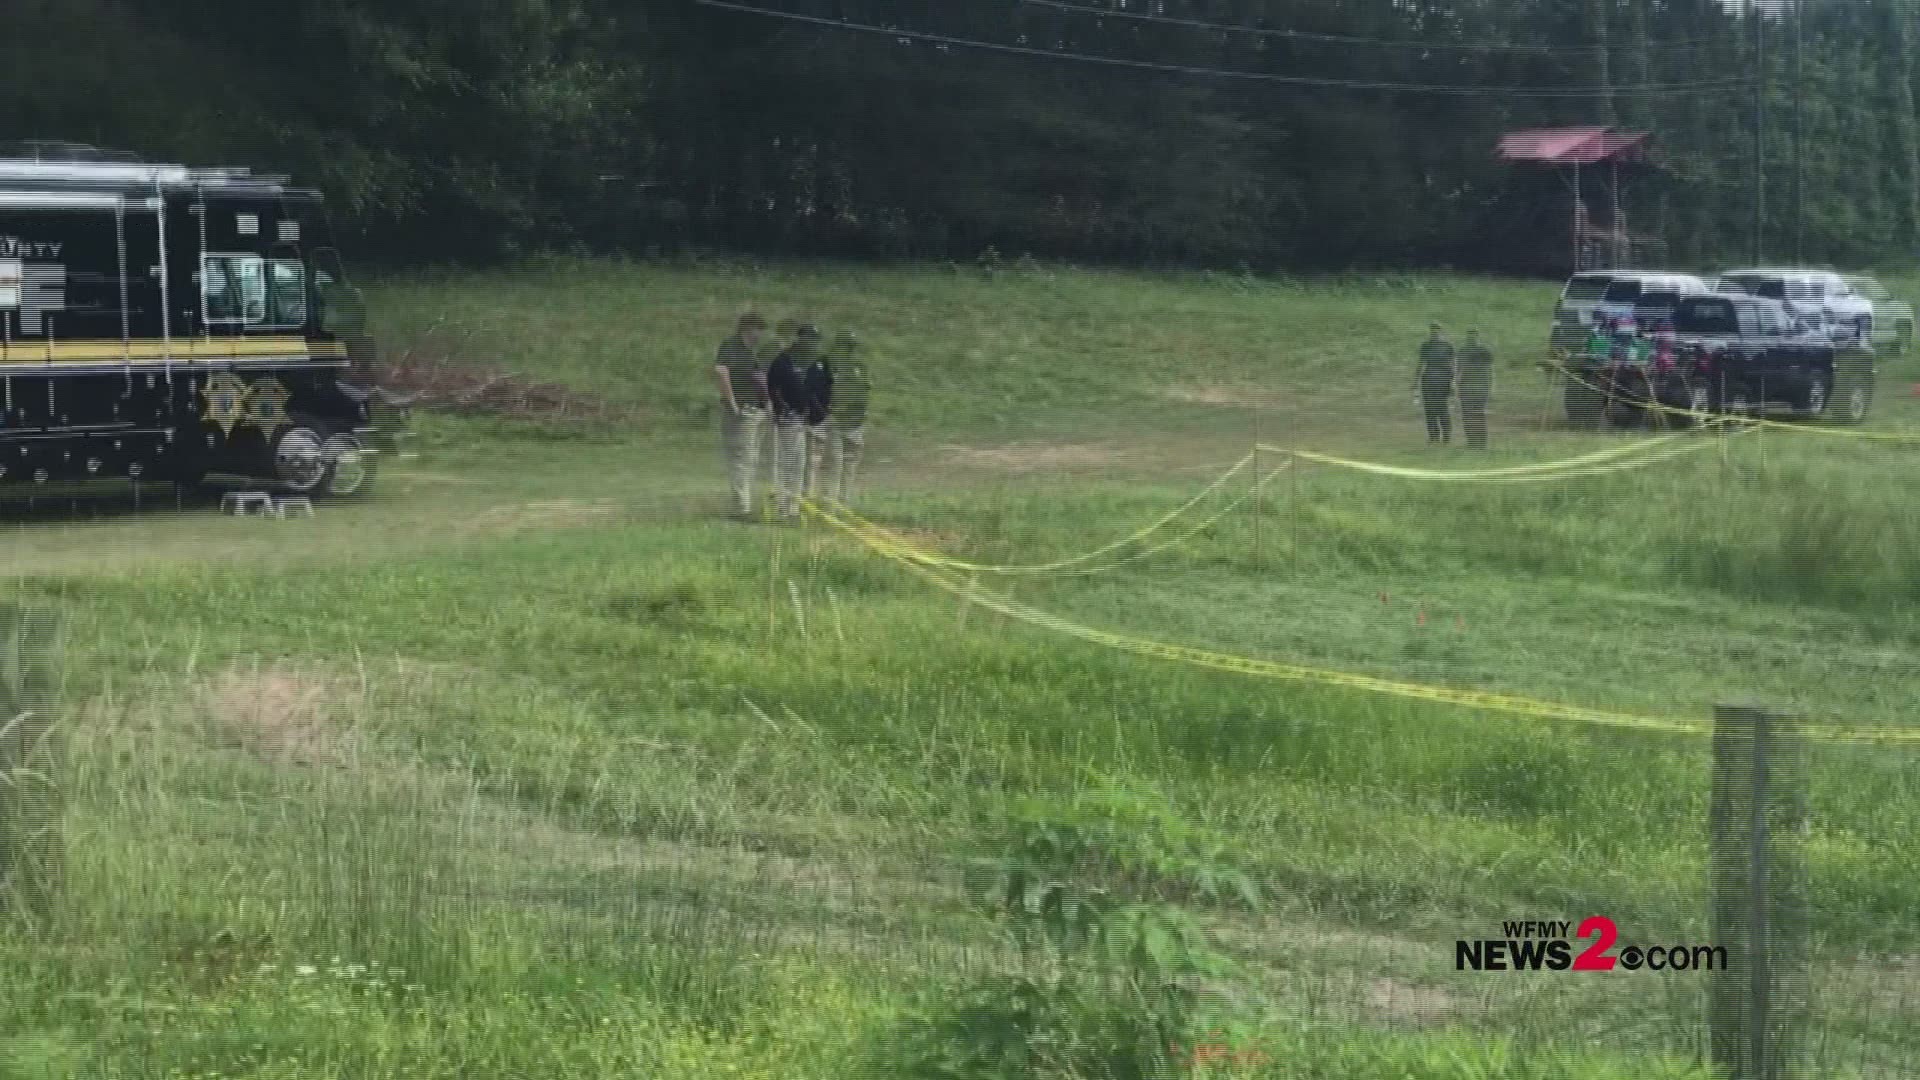 The Forsyth County Sheriff's Office and Winston-Salem Police are searching a field on Ogden School Road after a call that there ‘may be possible evidence of a serious crime’ in the marsh.